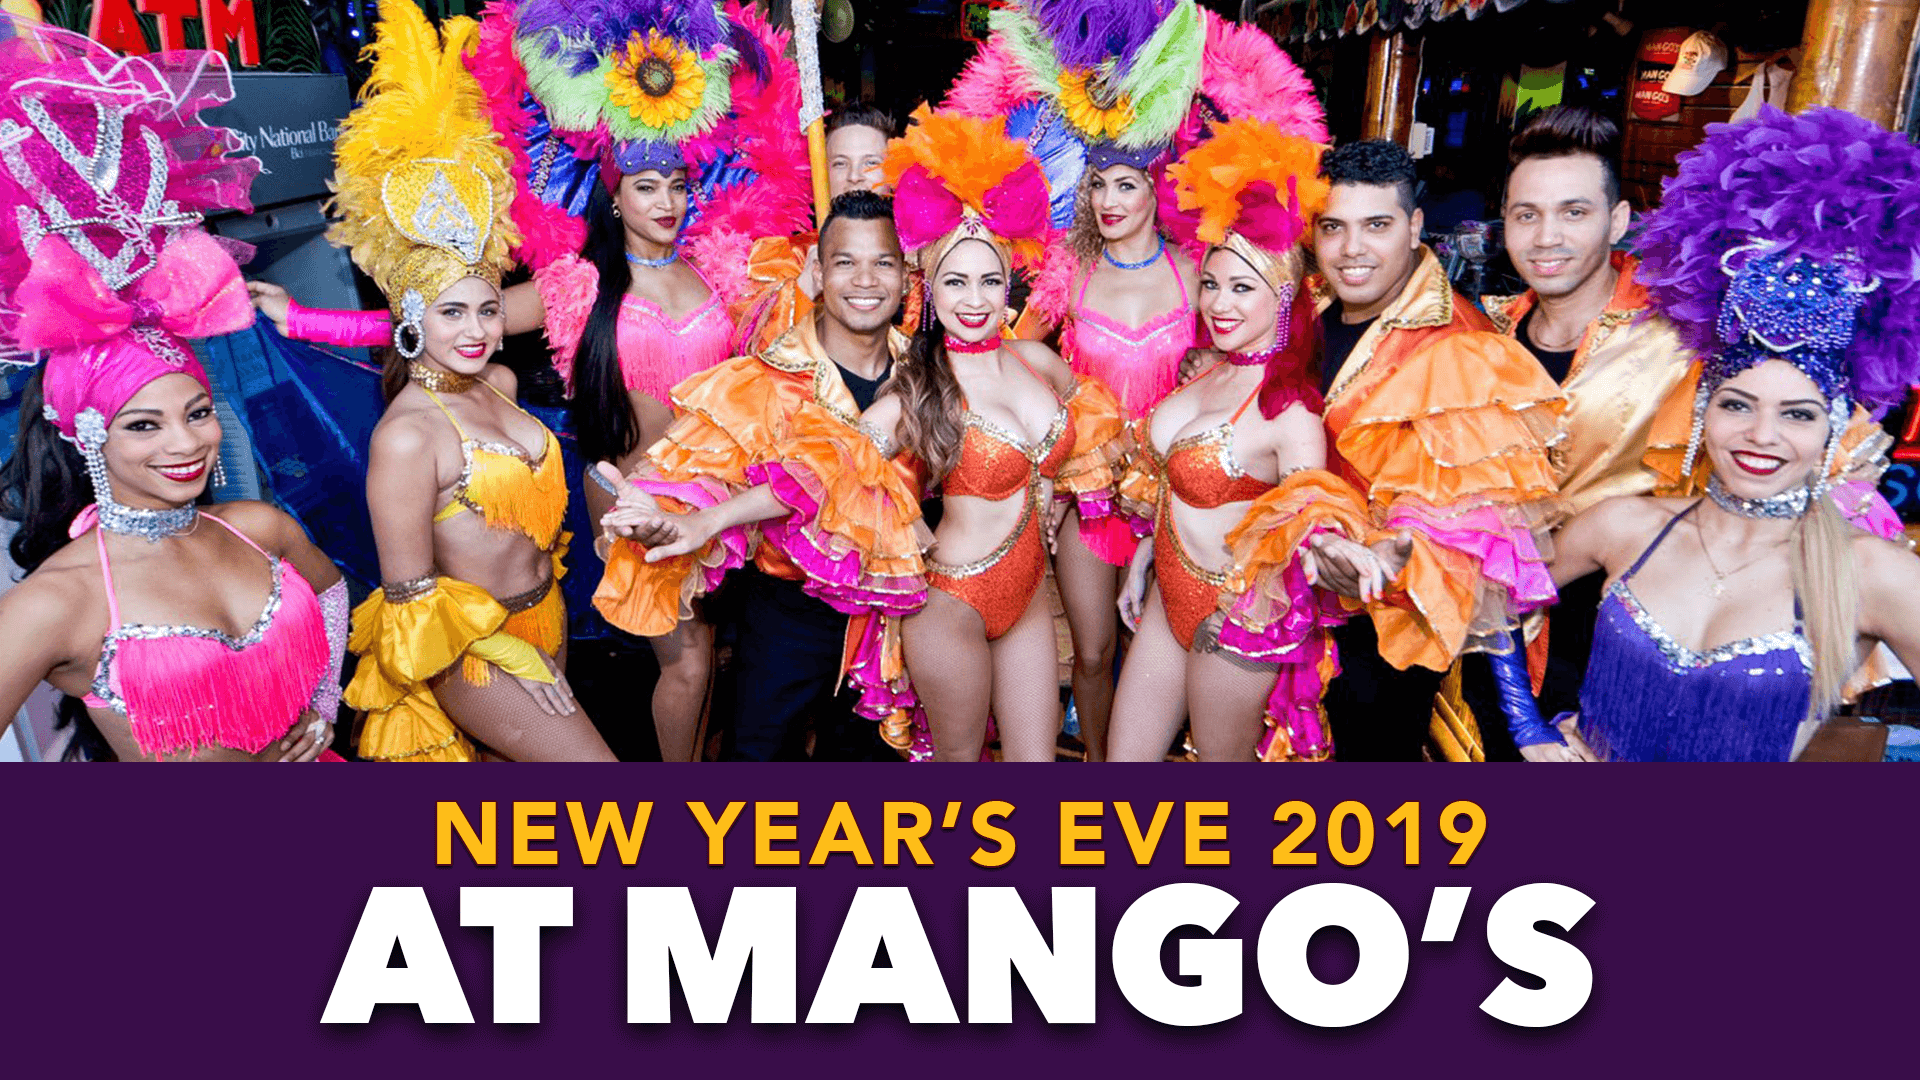 Mango’s South Beach Hosts New Year’s Eve Party Mango's Tropical Cafe